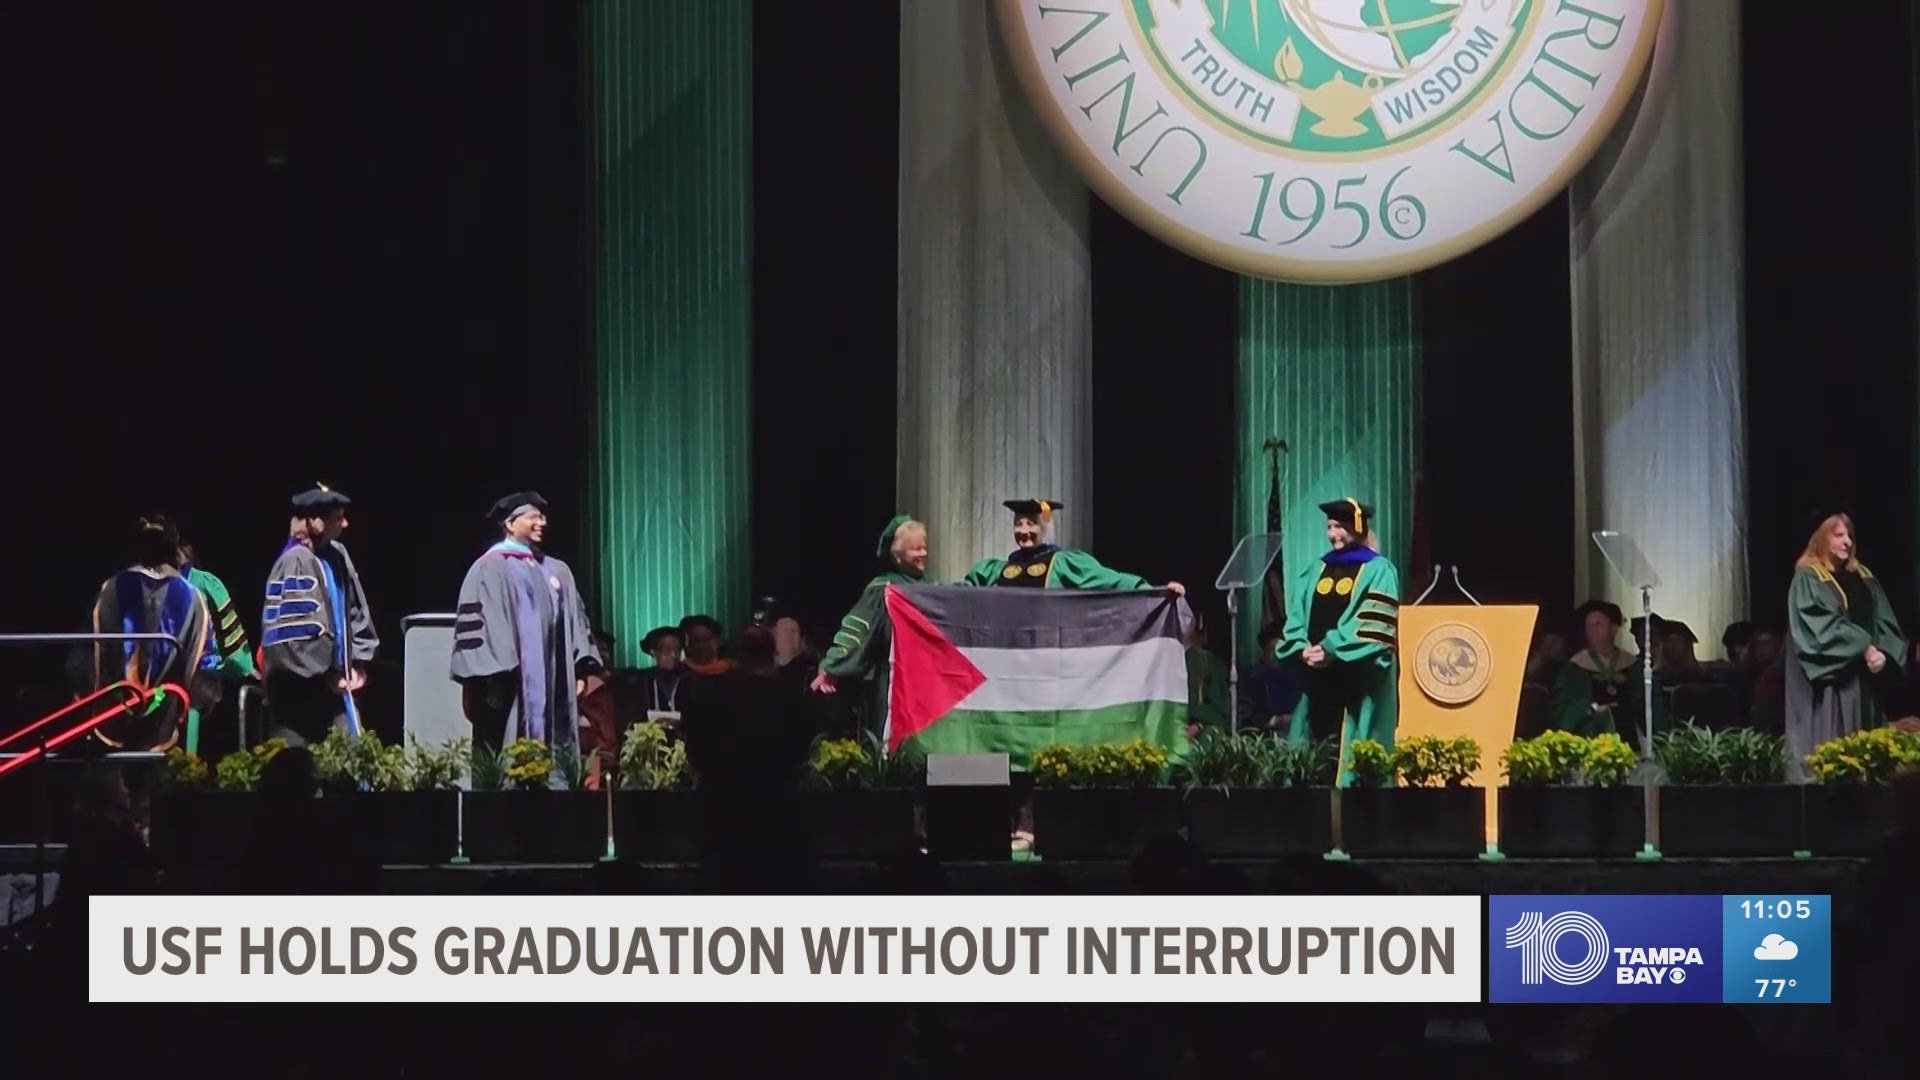 One student held up a Palestinian flag as they walked across the stage.